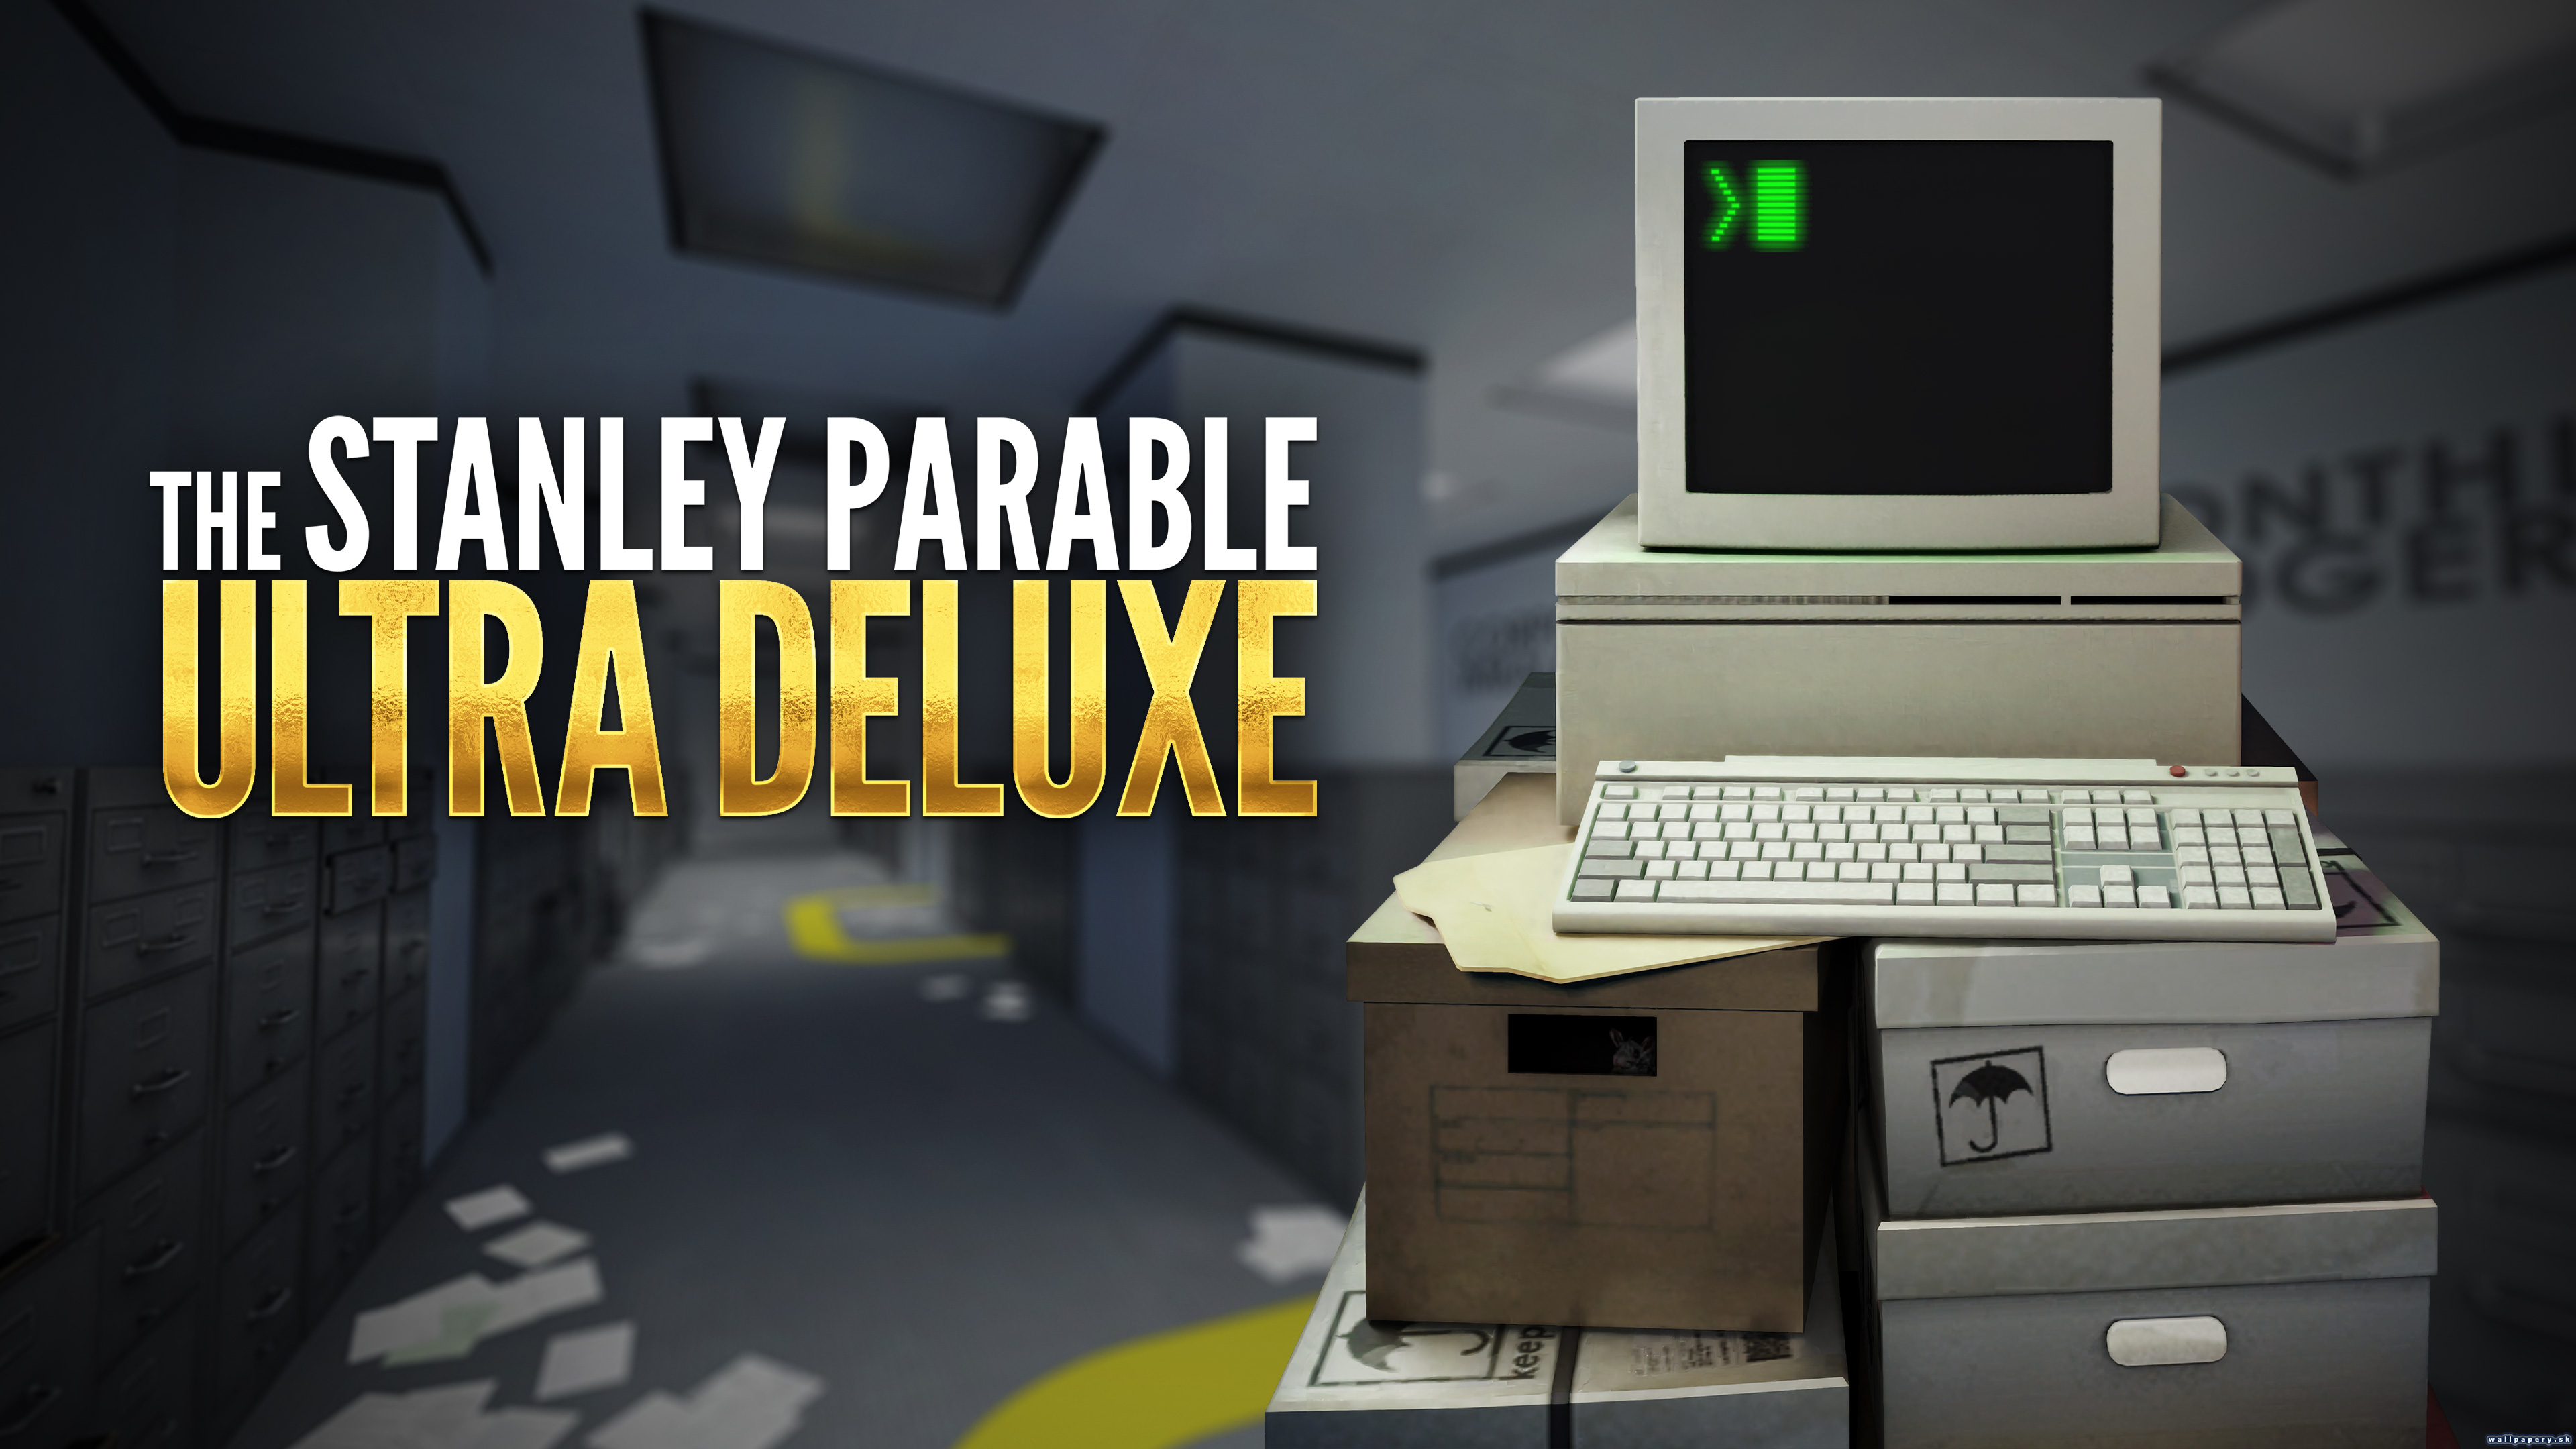 The Stanley Parable: Ultra Deluxe - wallpaper 1